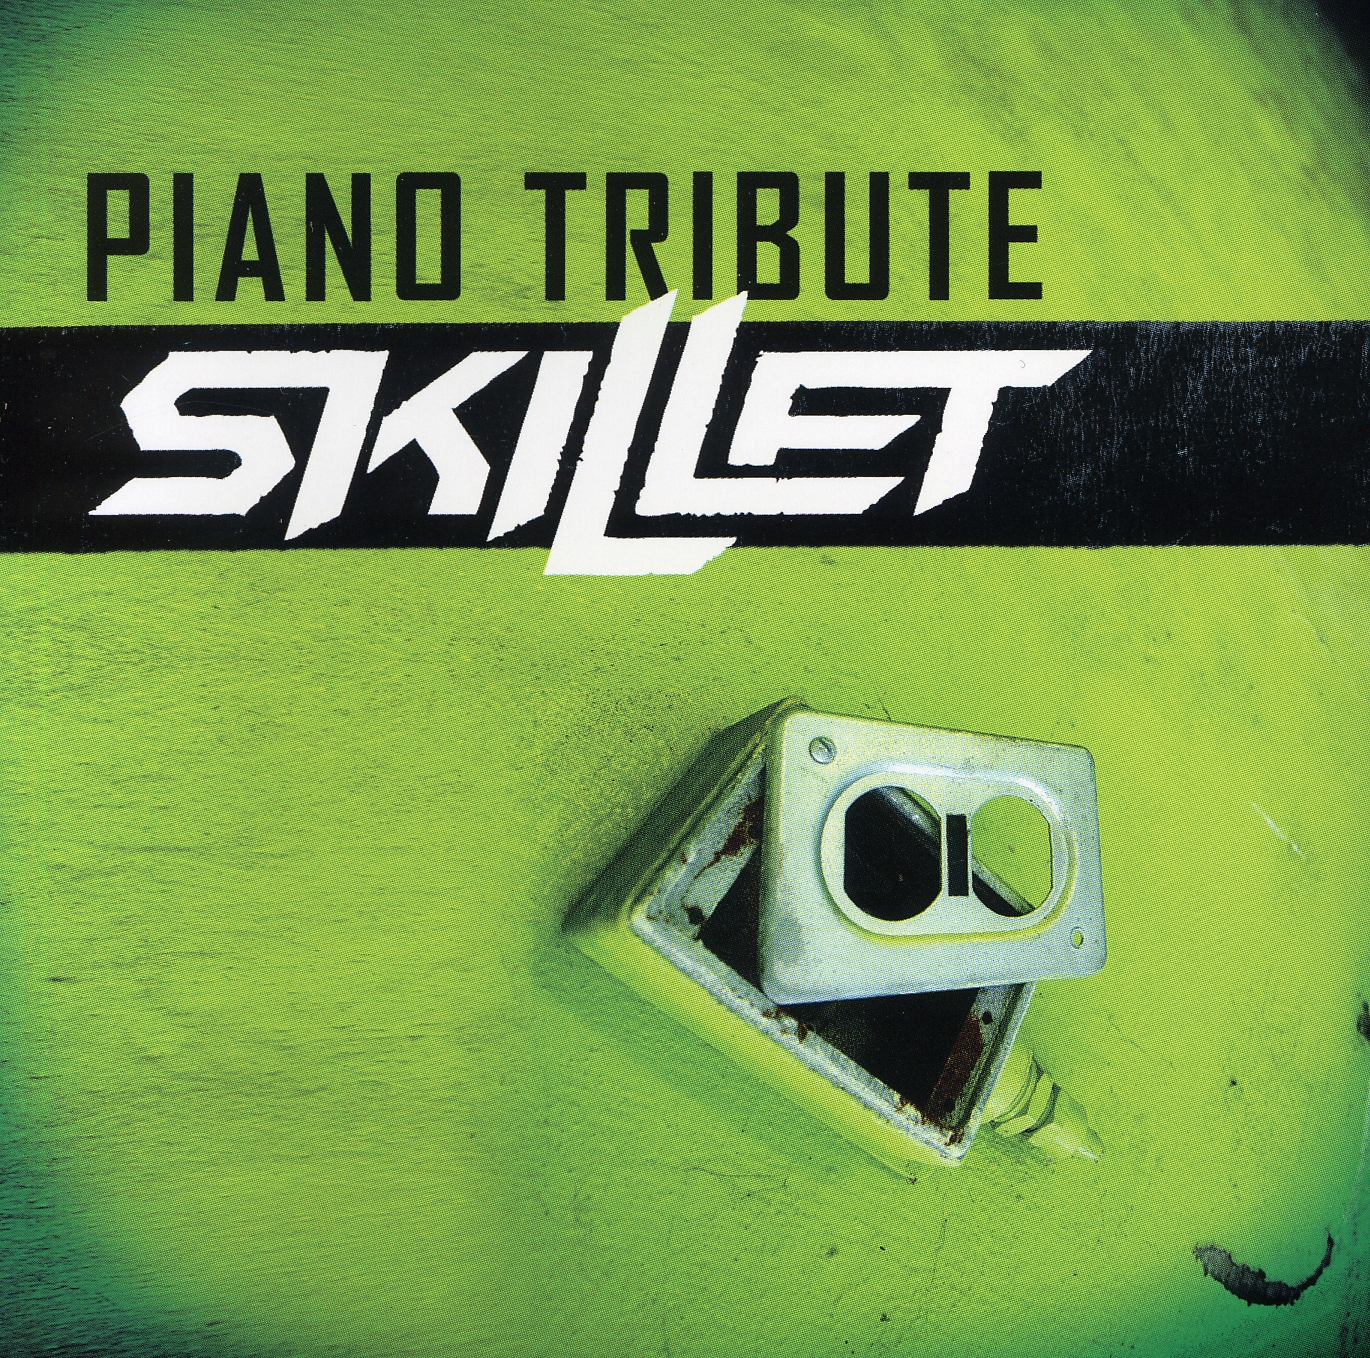 PIANO TRIBUTE TO SKILLET (MOD)